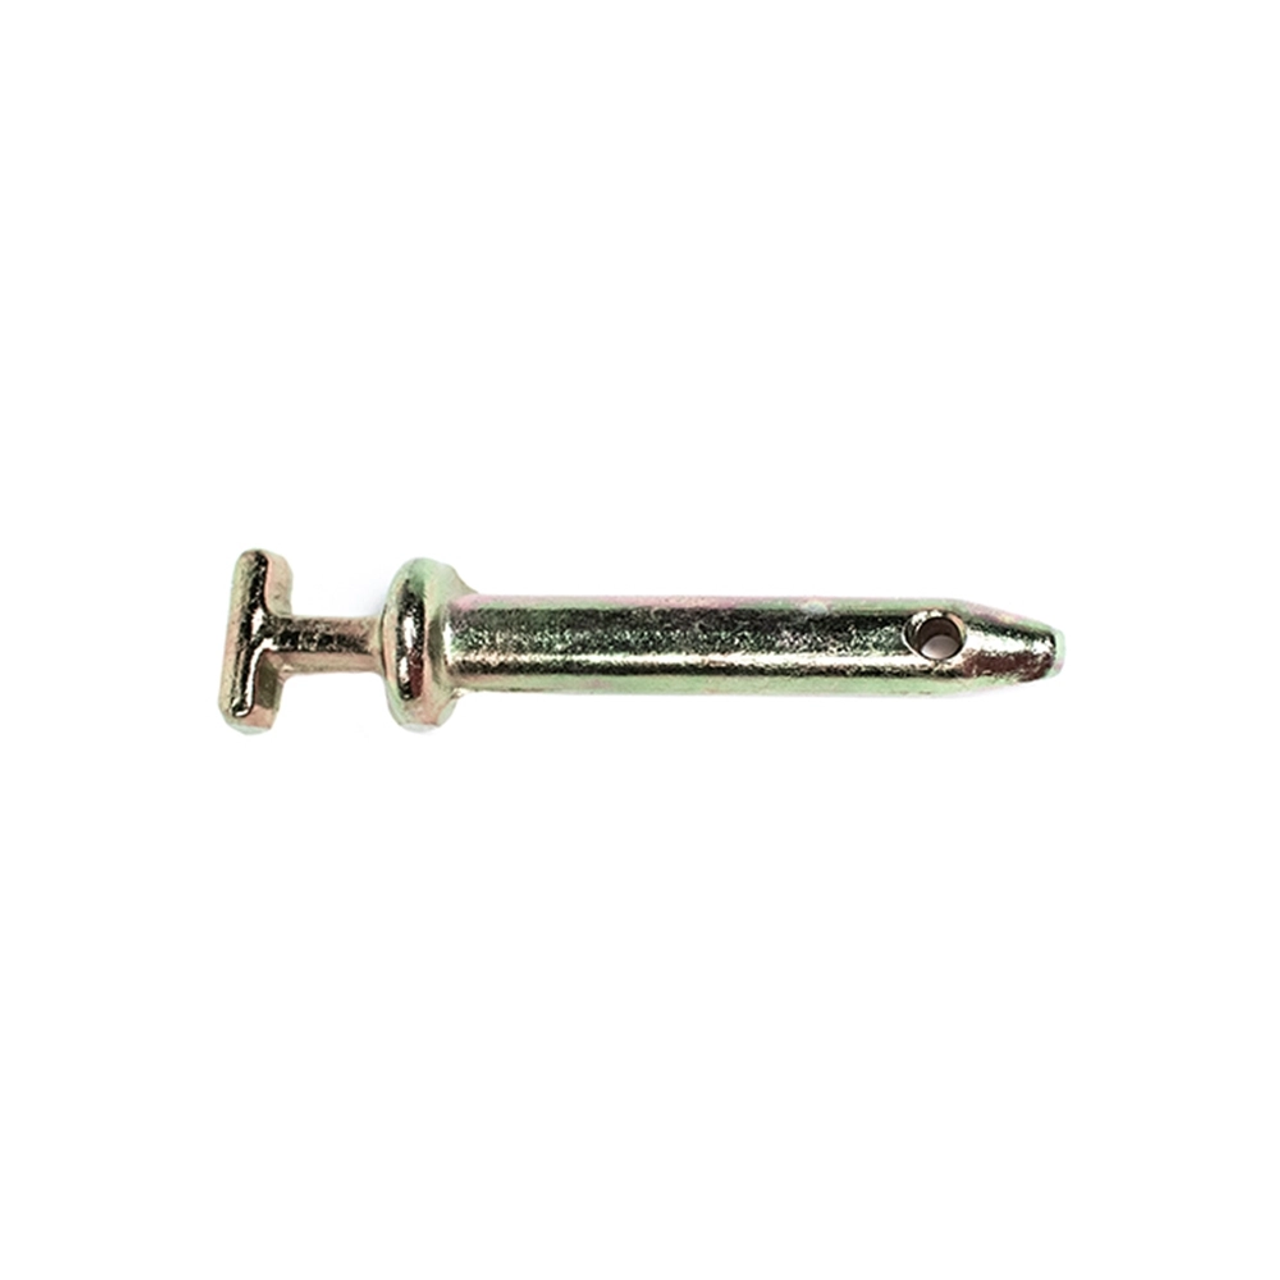 T-HANDLE CLEVIS PIN 1/2 x 2-1/4